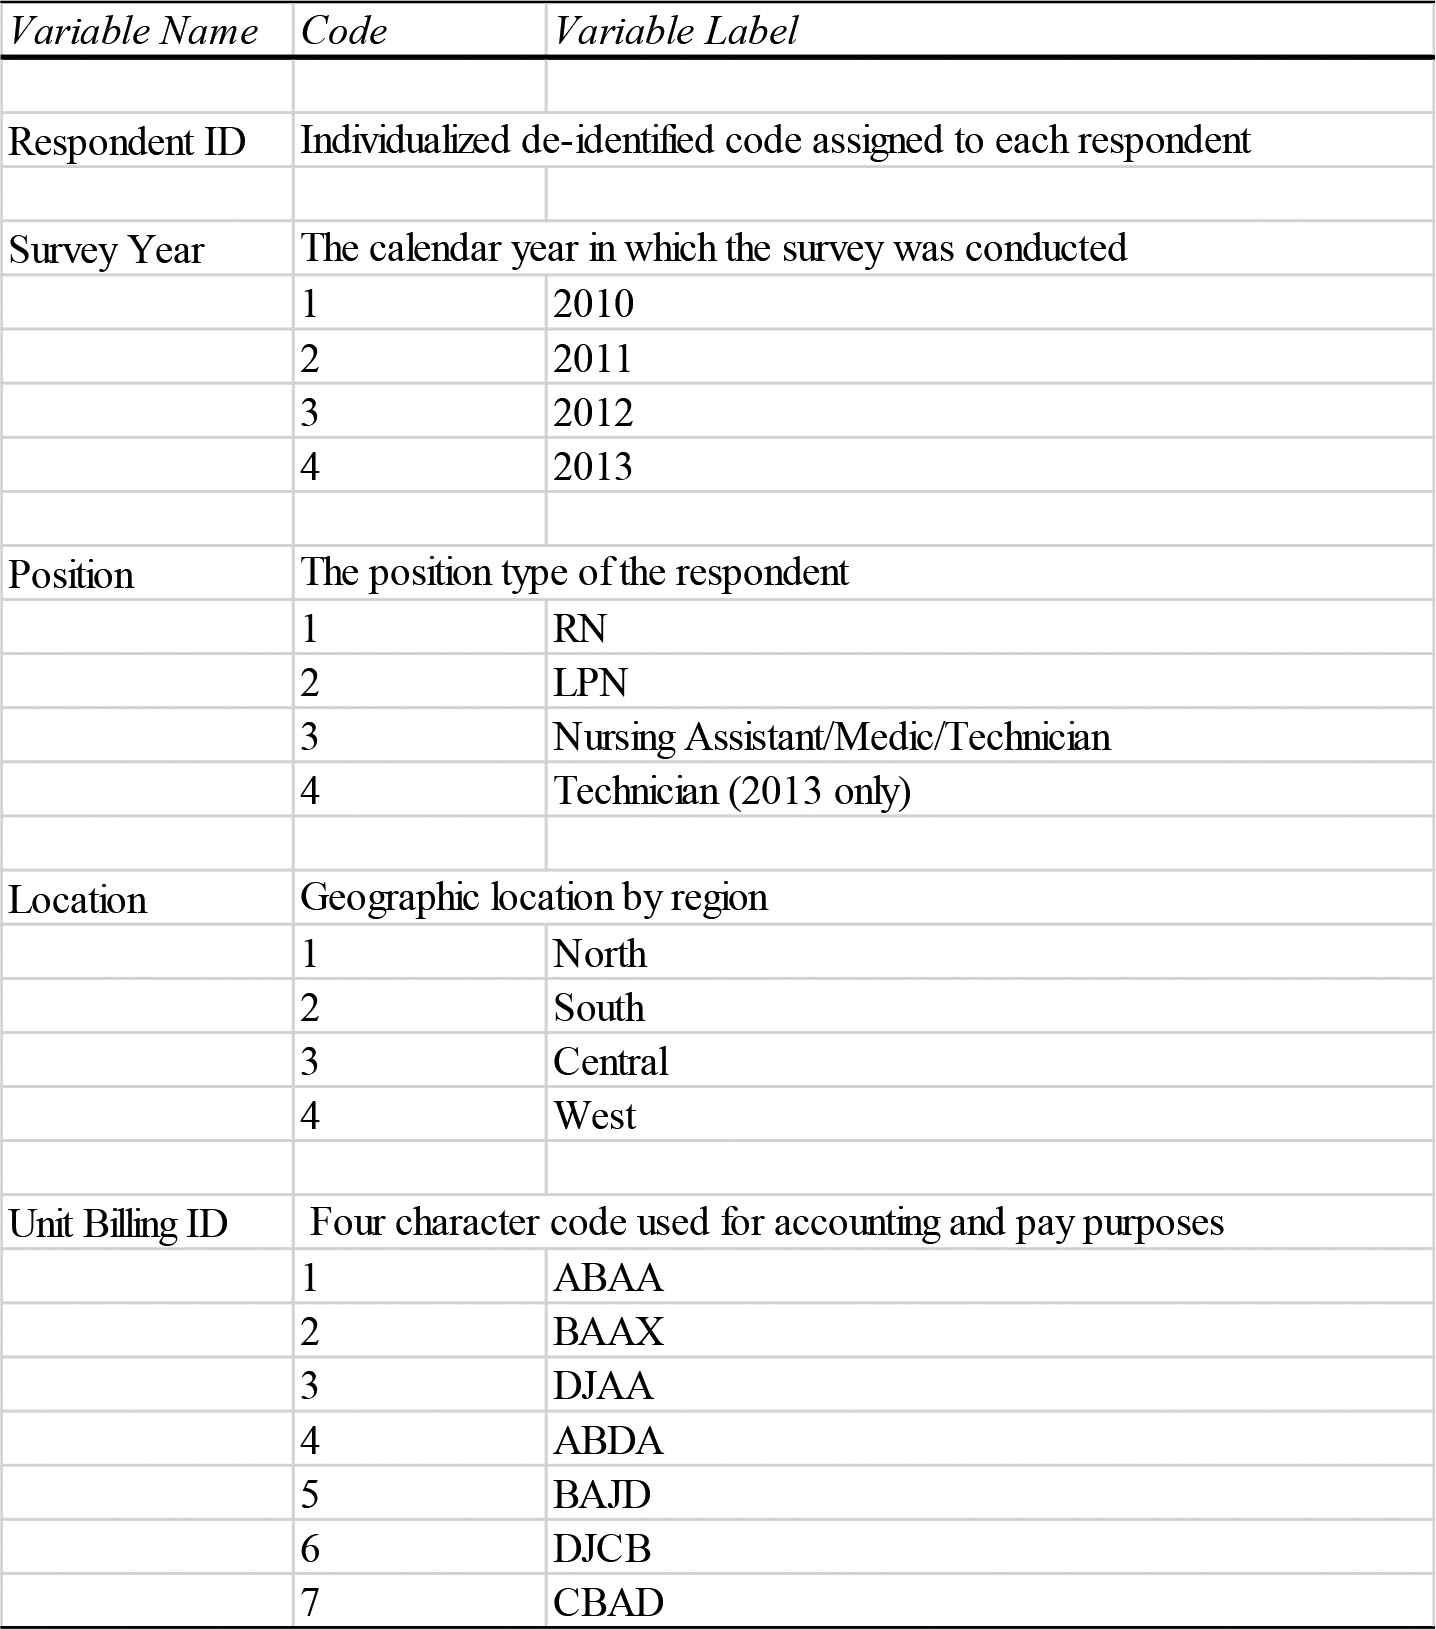 Figure 3. This is a sample of what a codebook may look like. At a minimum, the codebook provides a definition for each variable and also identifies the name, code, and label for each variable.